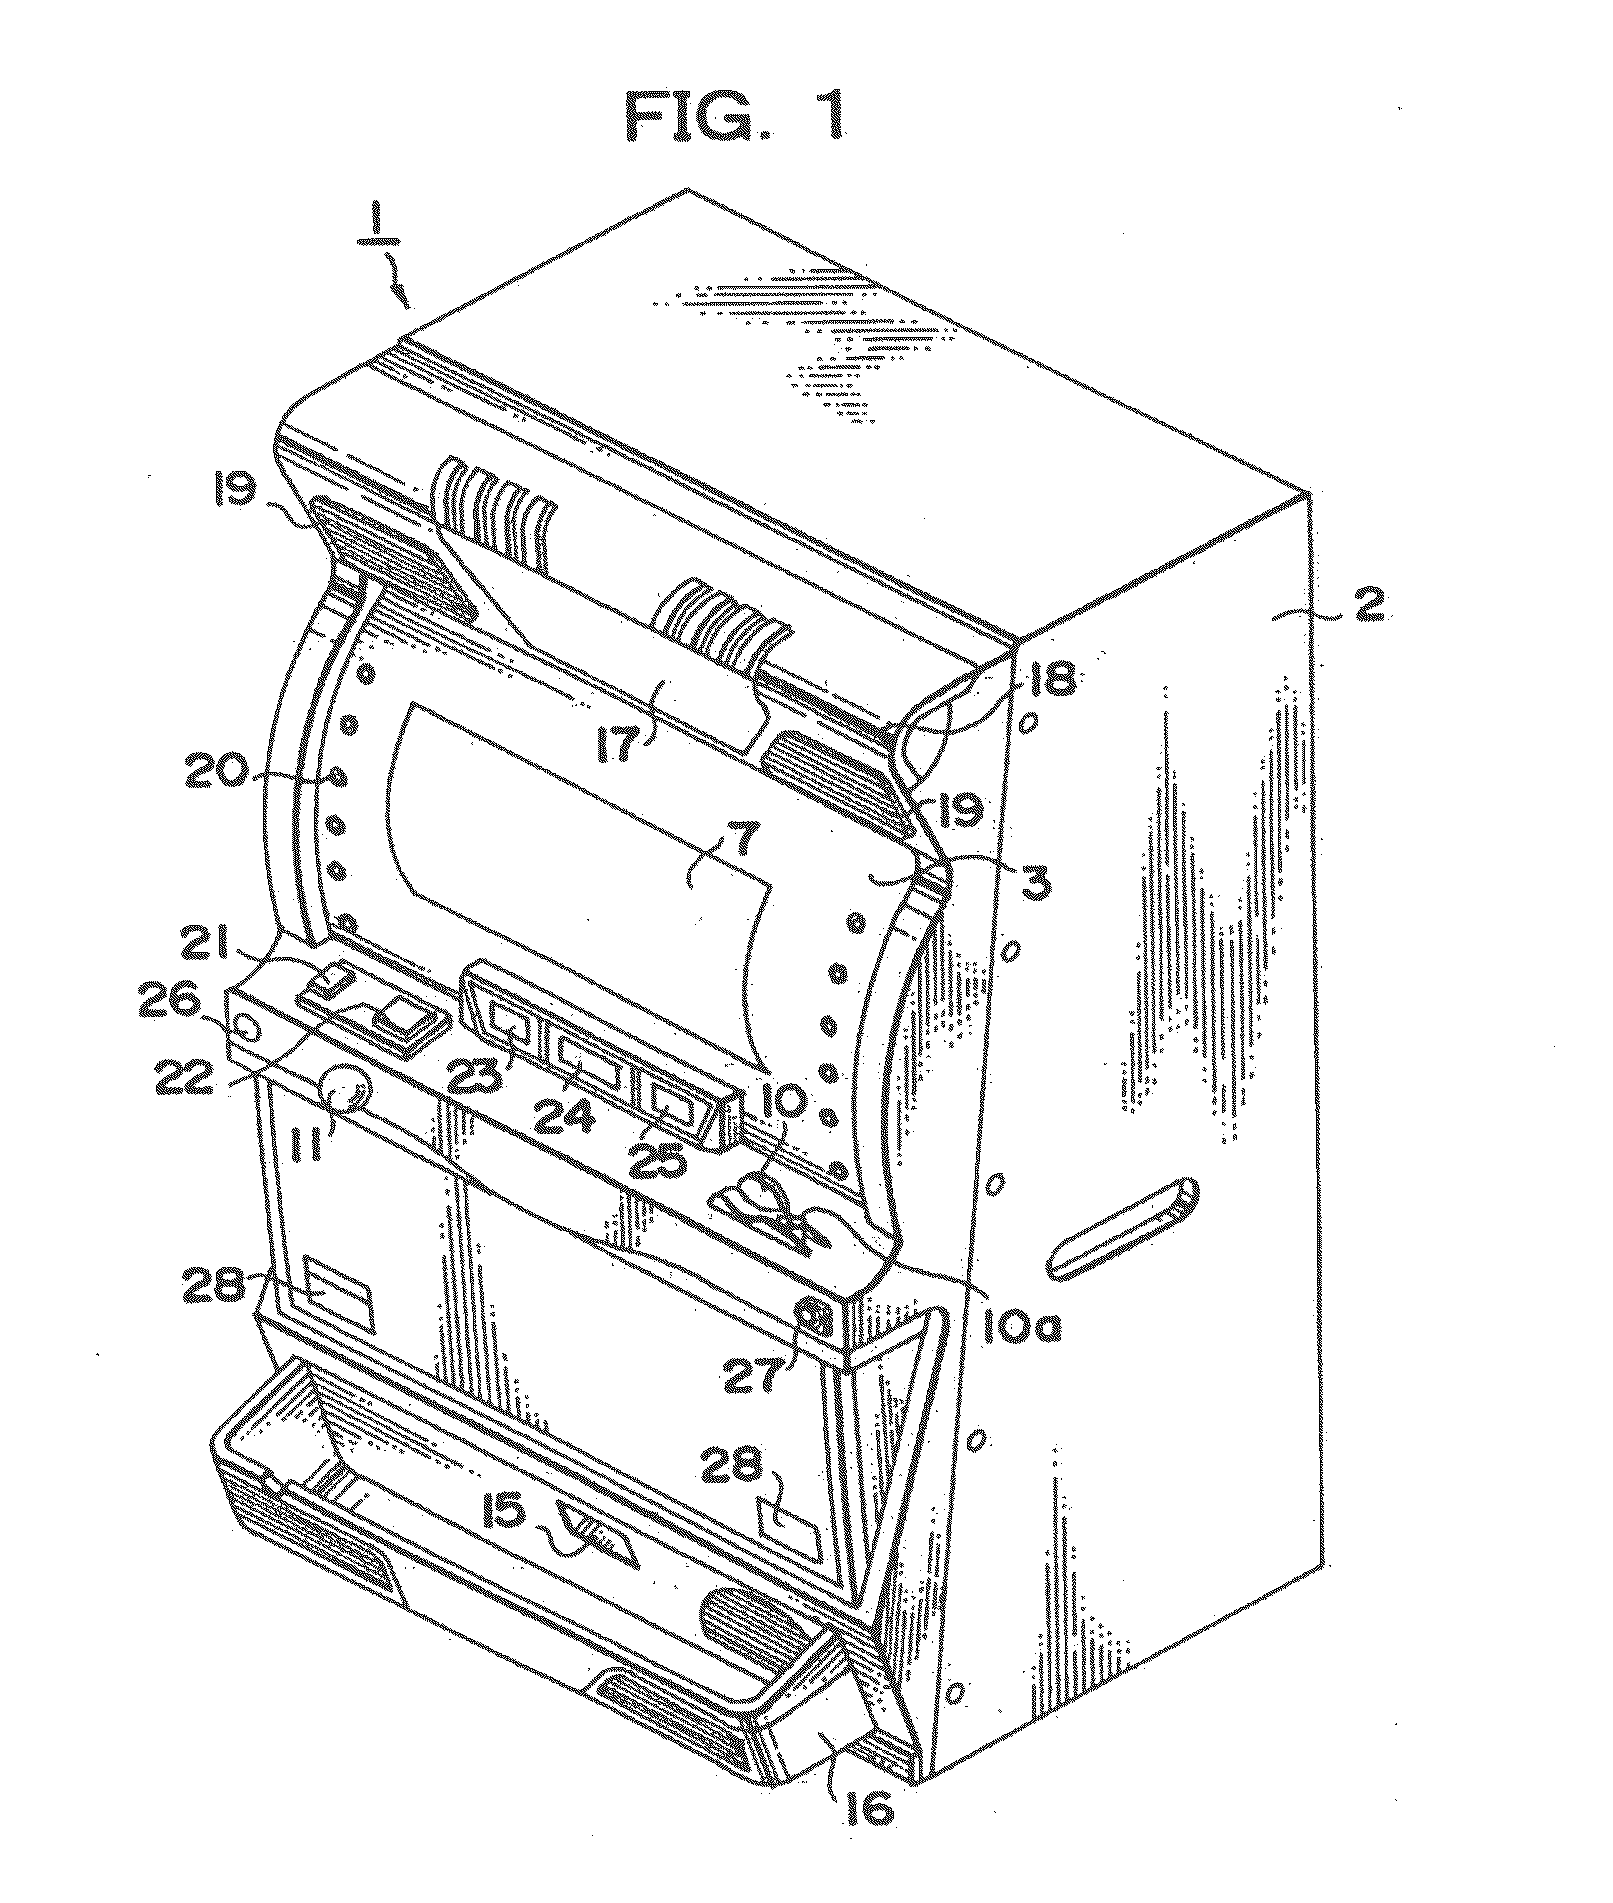 Gaming machine and methods of allowing a player to play gaming machines having selectable reel configurations